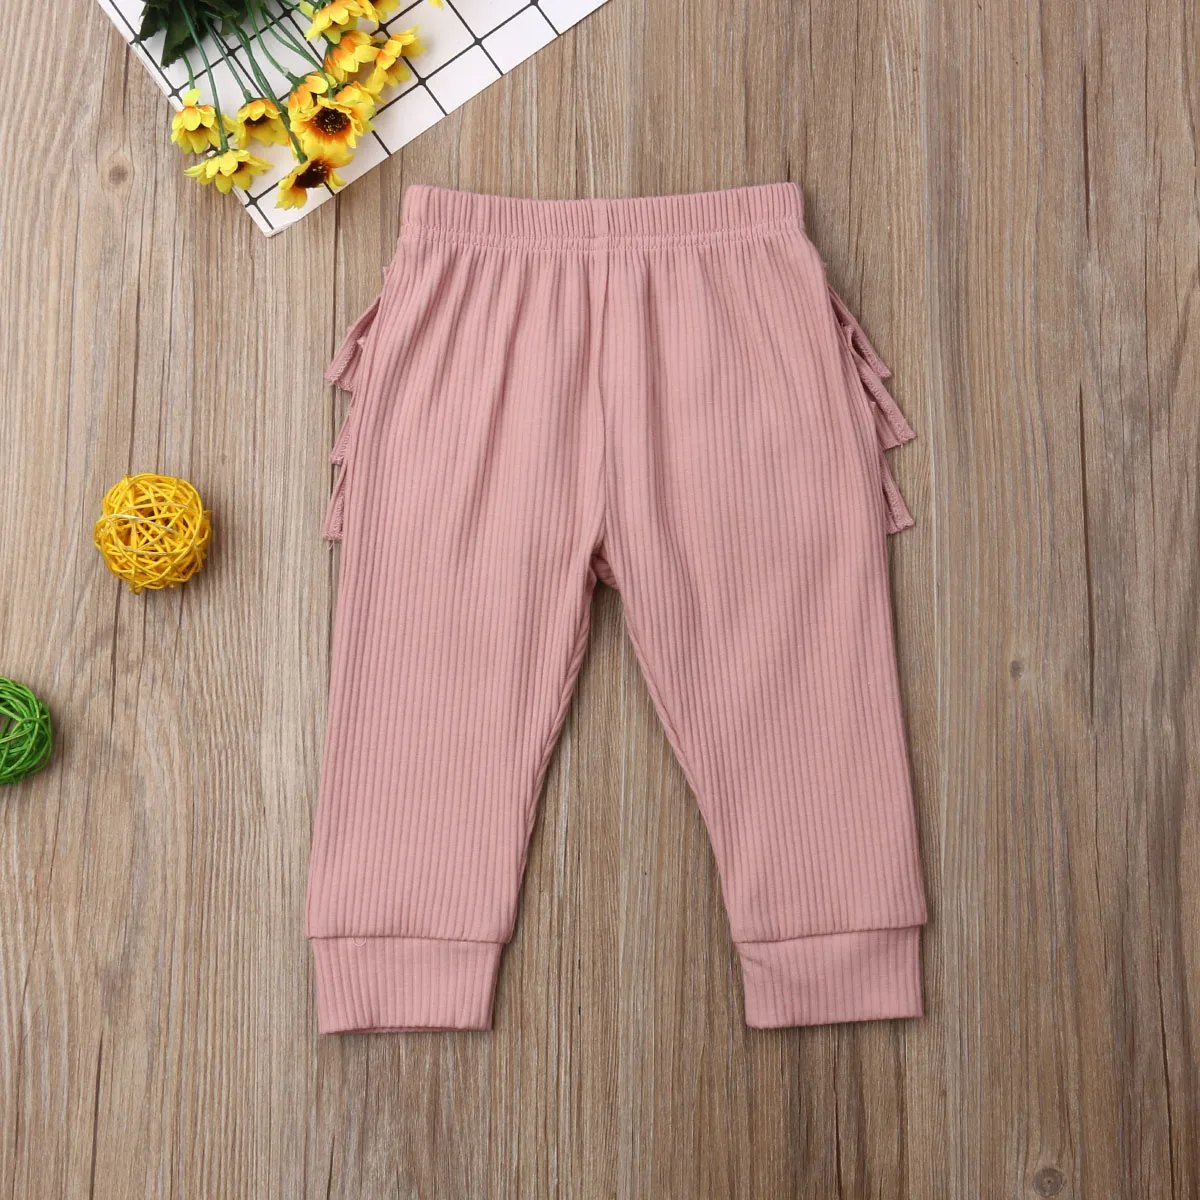 Pudcoco Kids Baby Girls Solid Color Cotton Ruffle Leggings Bottoms Long Pants Trousers 